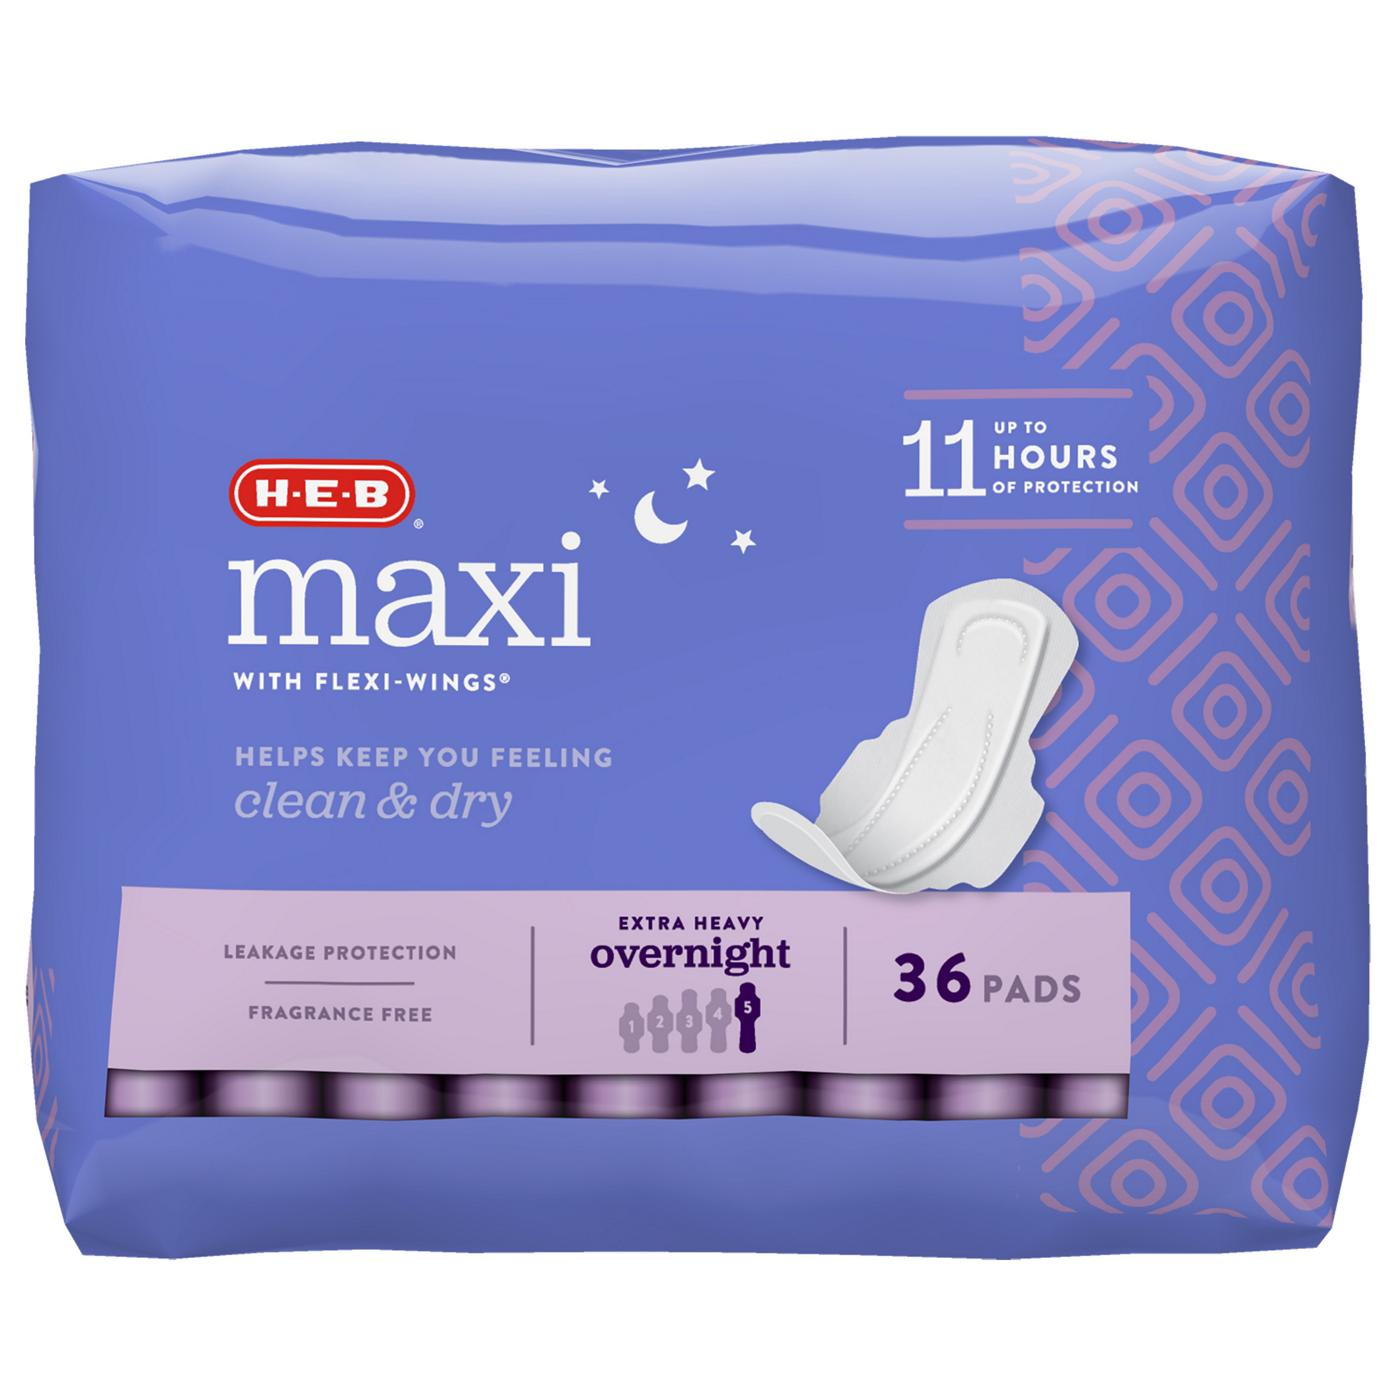 H-E-B Maxi with Flexi-Wings Overnight Pads - Extra Heavy; image 1 of 7